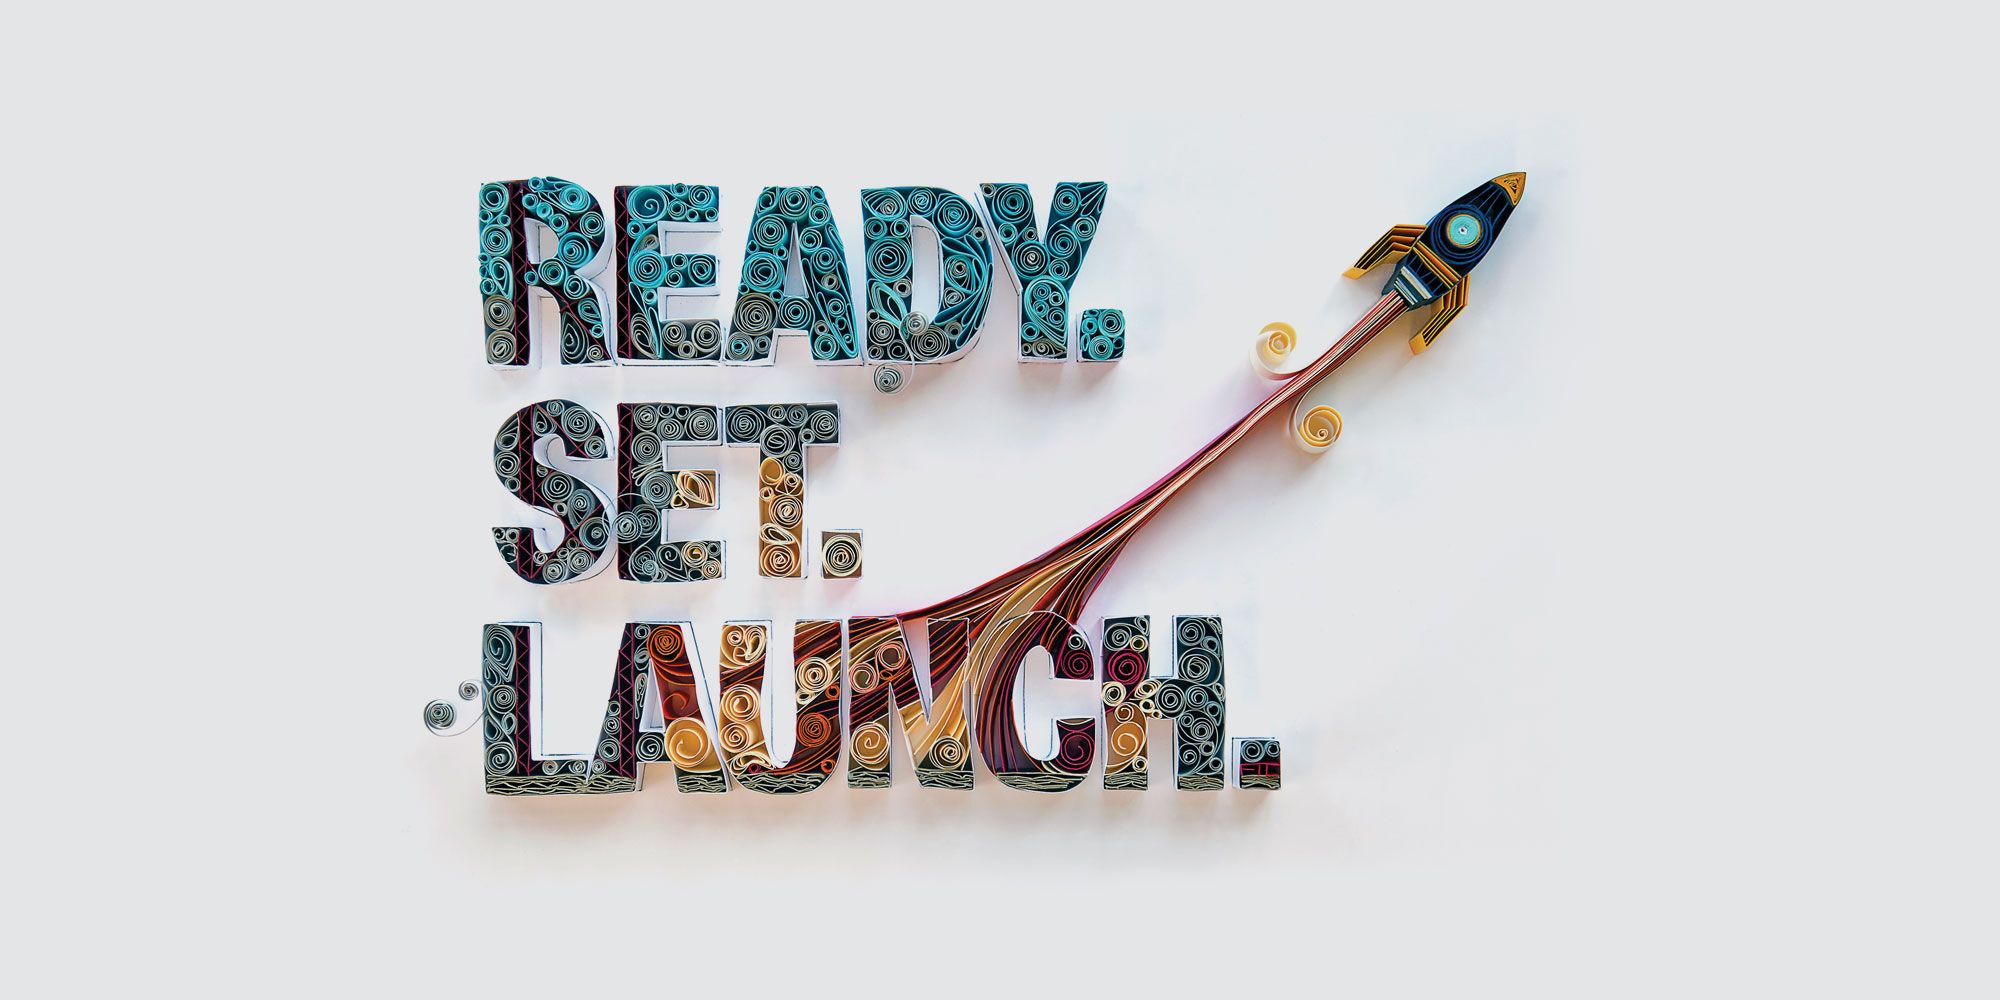 Paper quilling graphic that says "Ready. Set. Launch." and has a rocket flying away.